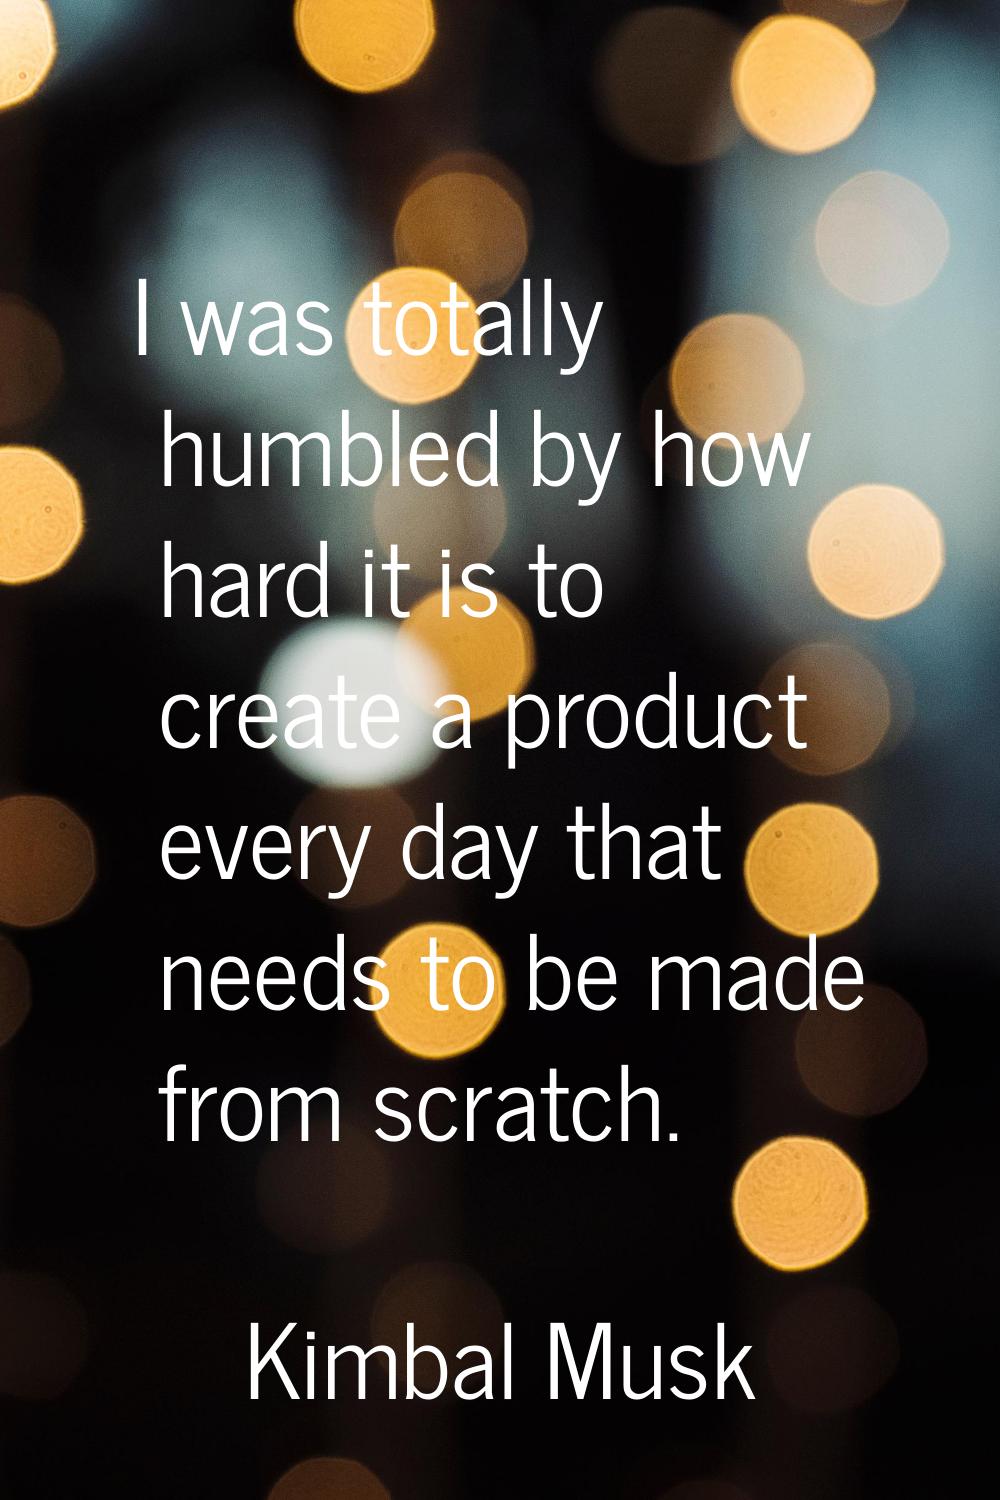 I was totally humbled by how hard it is to create a product every day that needs to be made from sc